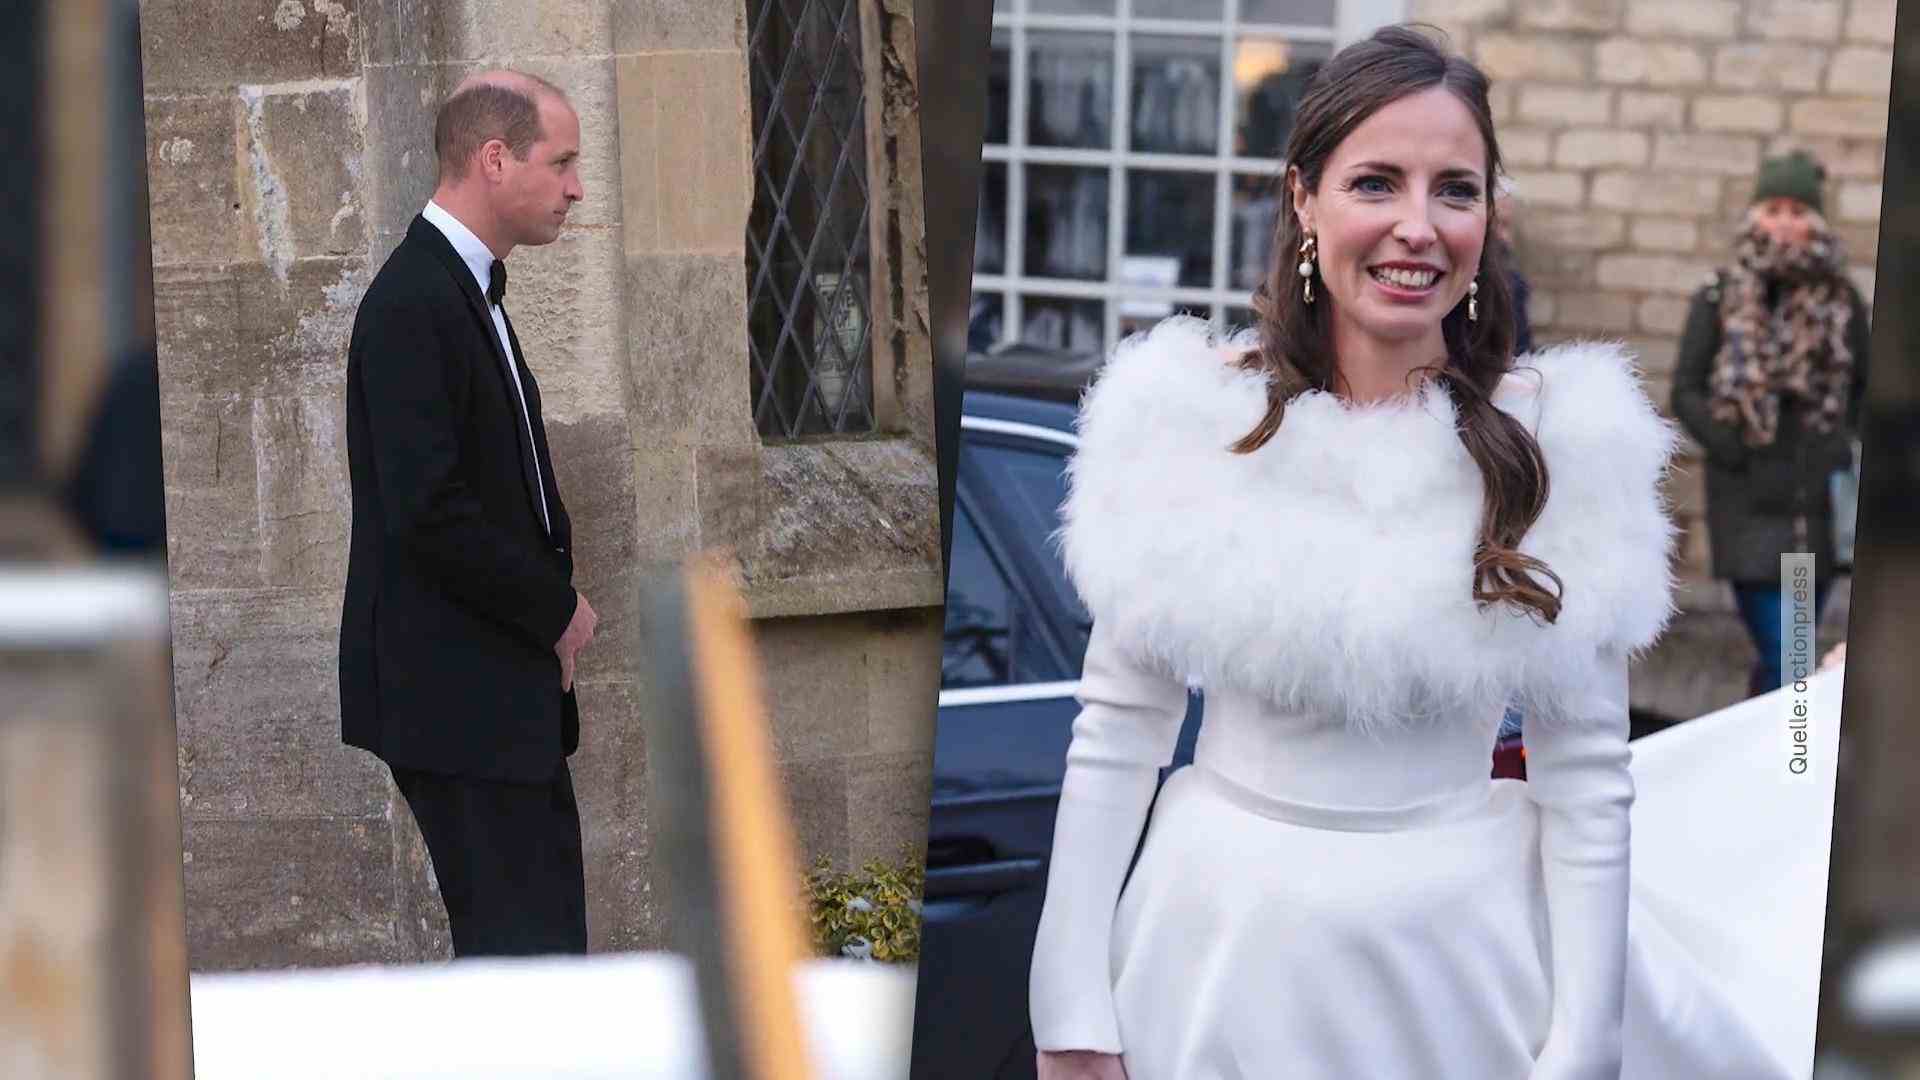 Prince William attends his ex-girlfriend's wedding without Princess Kate